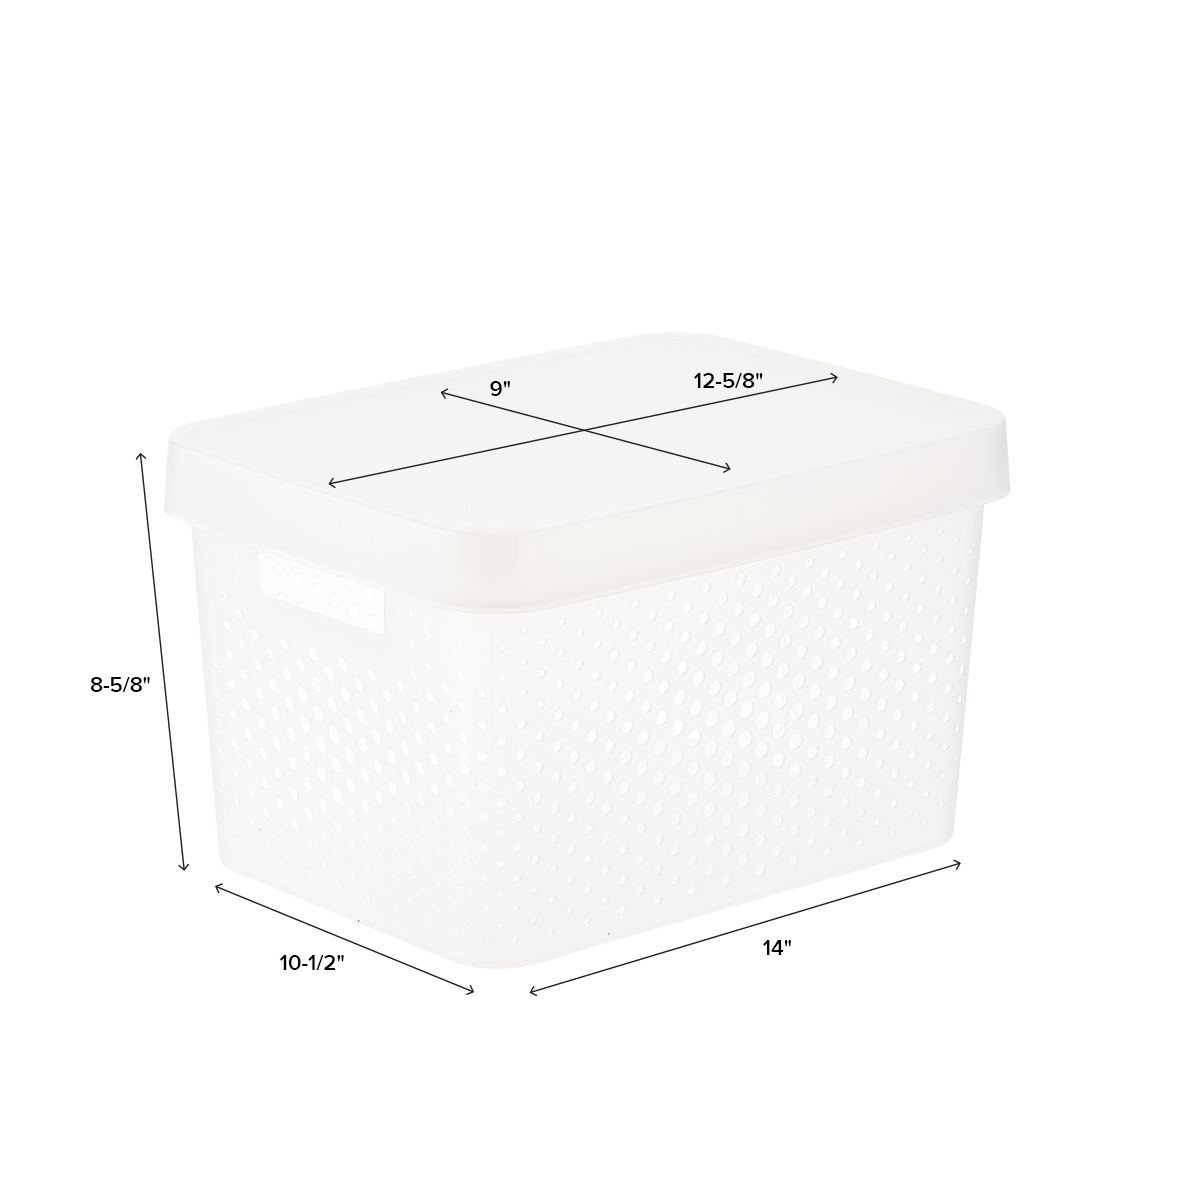 https://www.containerstore.com/catalogimages/475669/10076450-infinity-dot-box-translucen.jpg